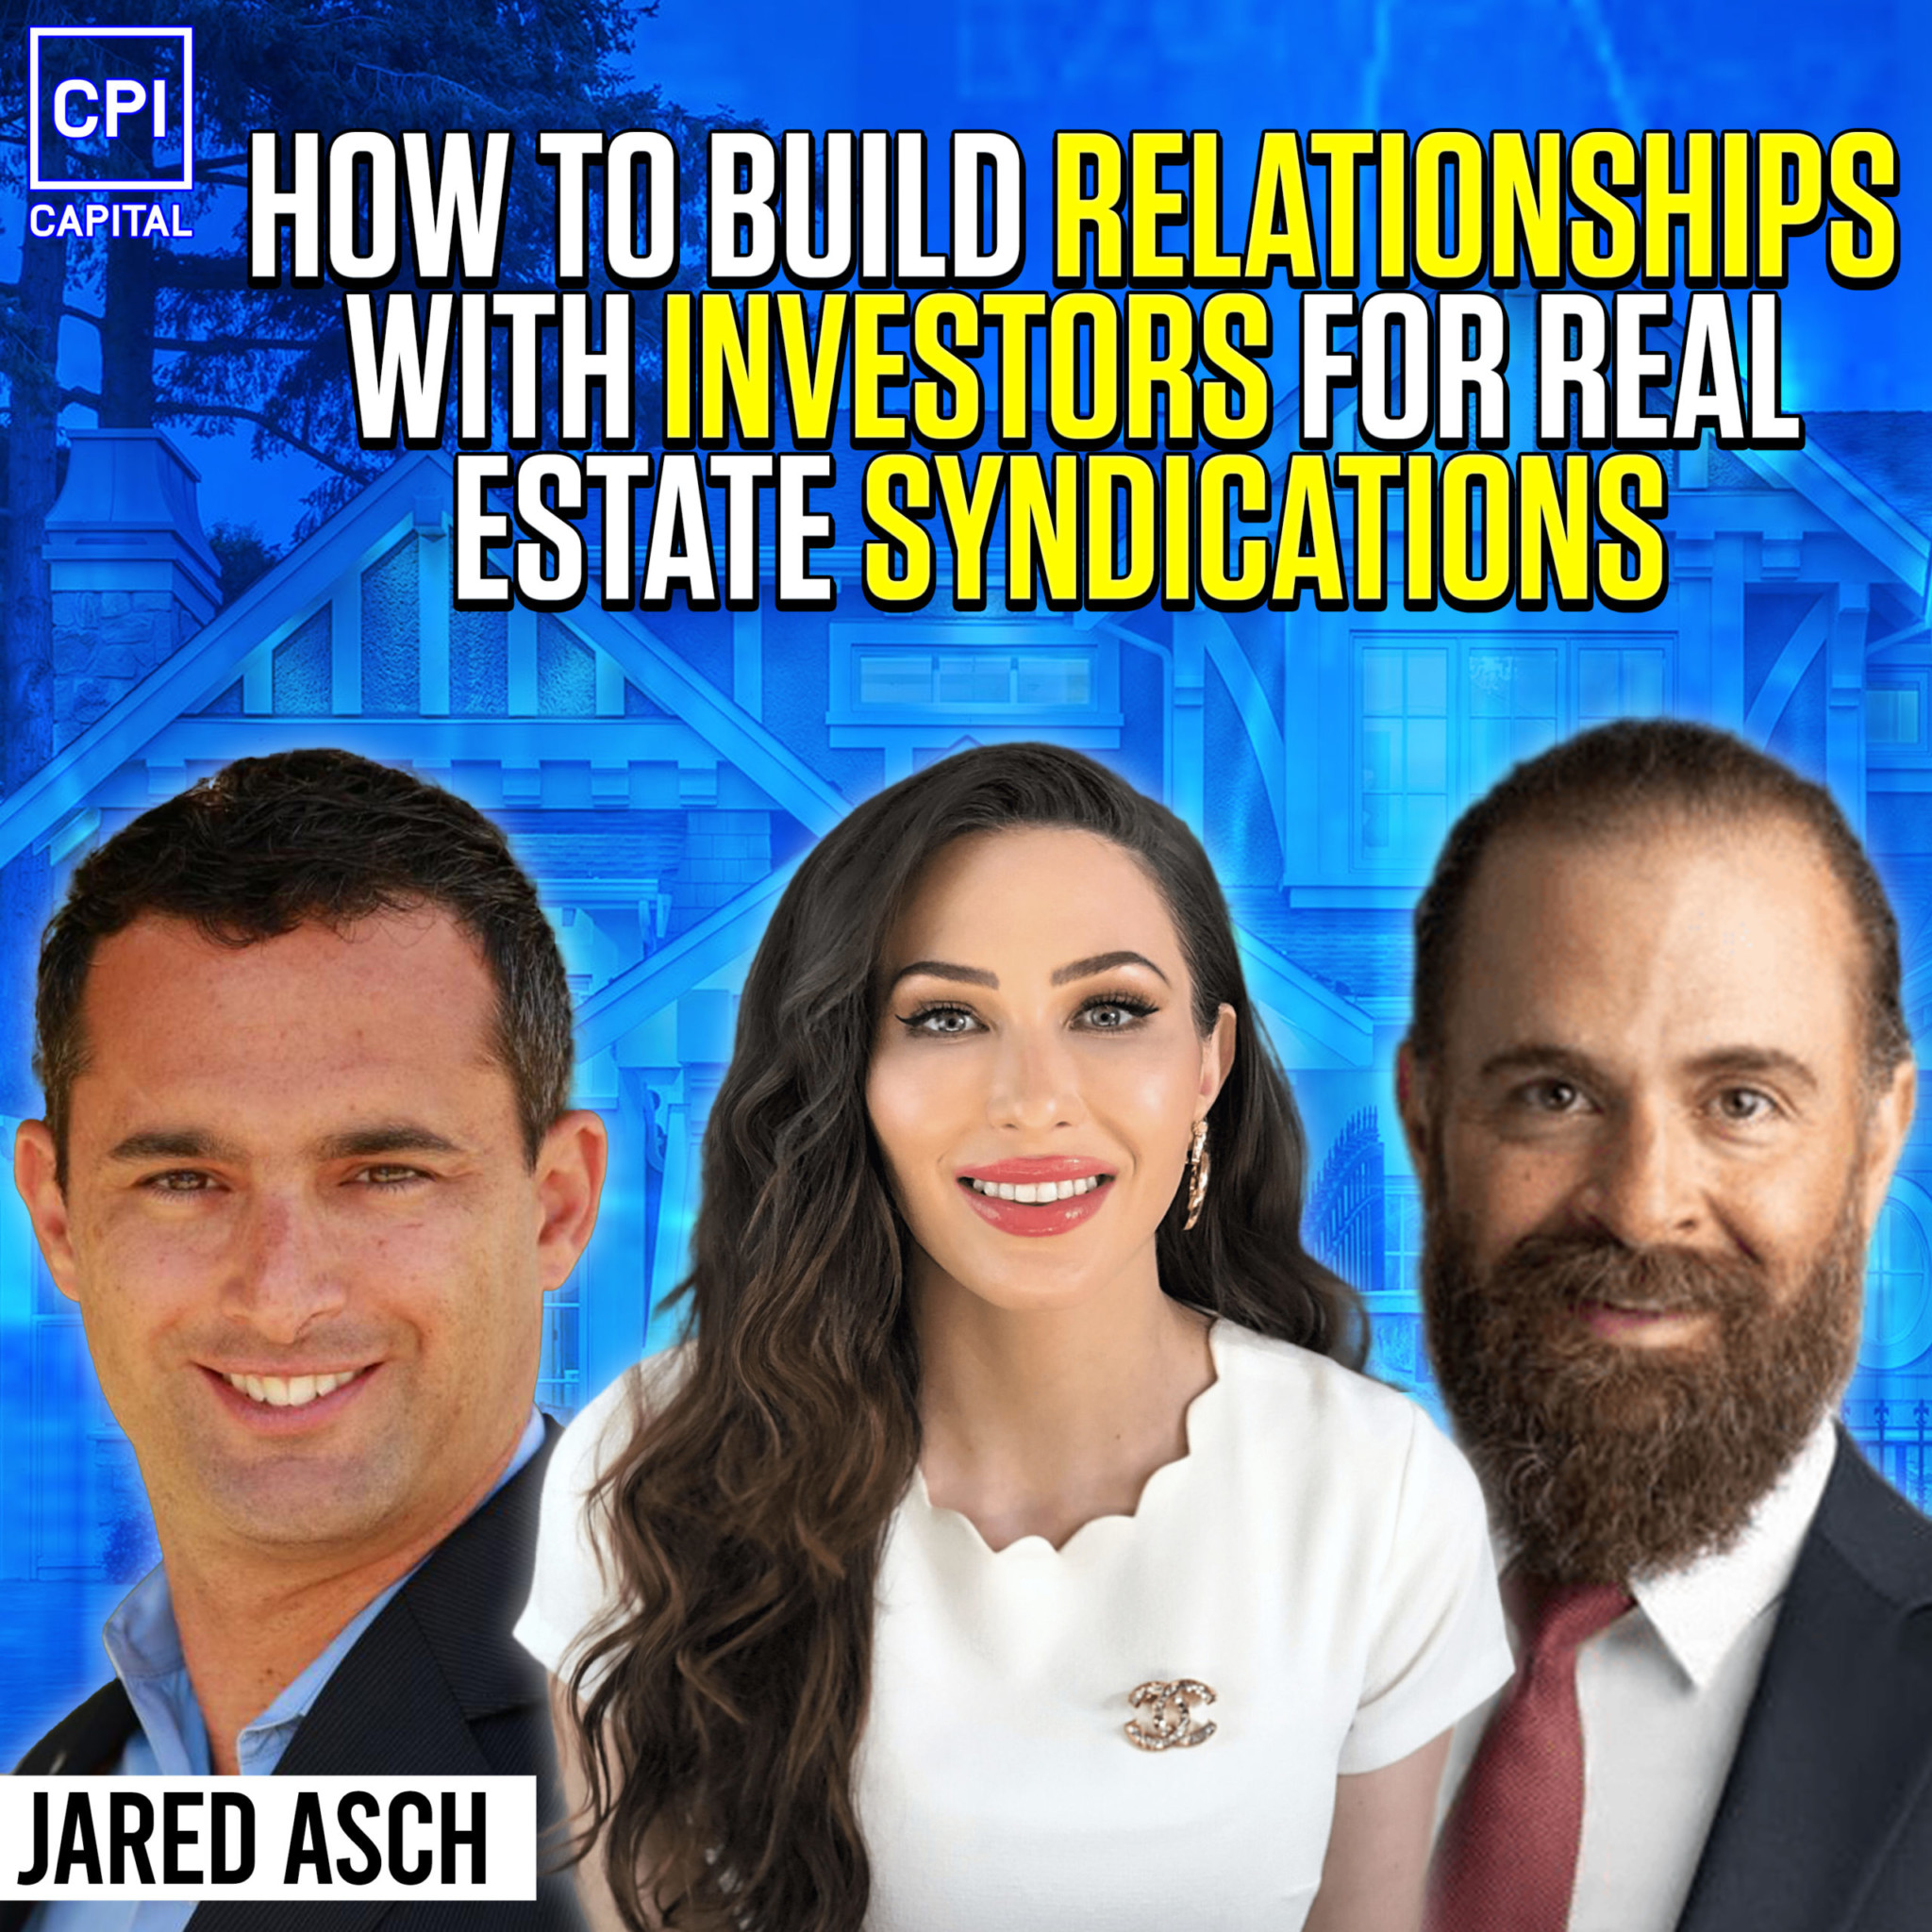 How To Build Relationships With Investors For Real Estate Syndications – Jared Asch